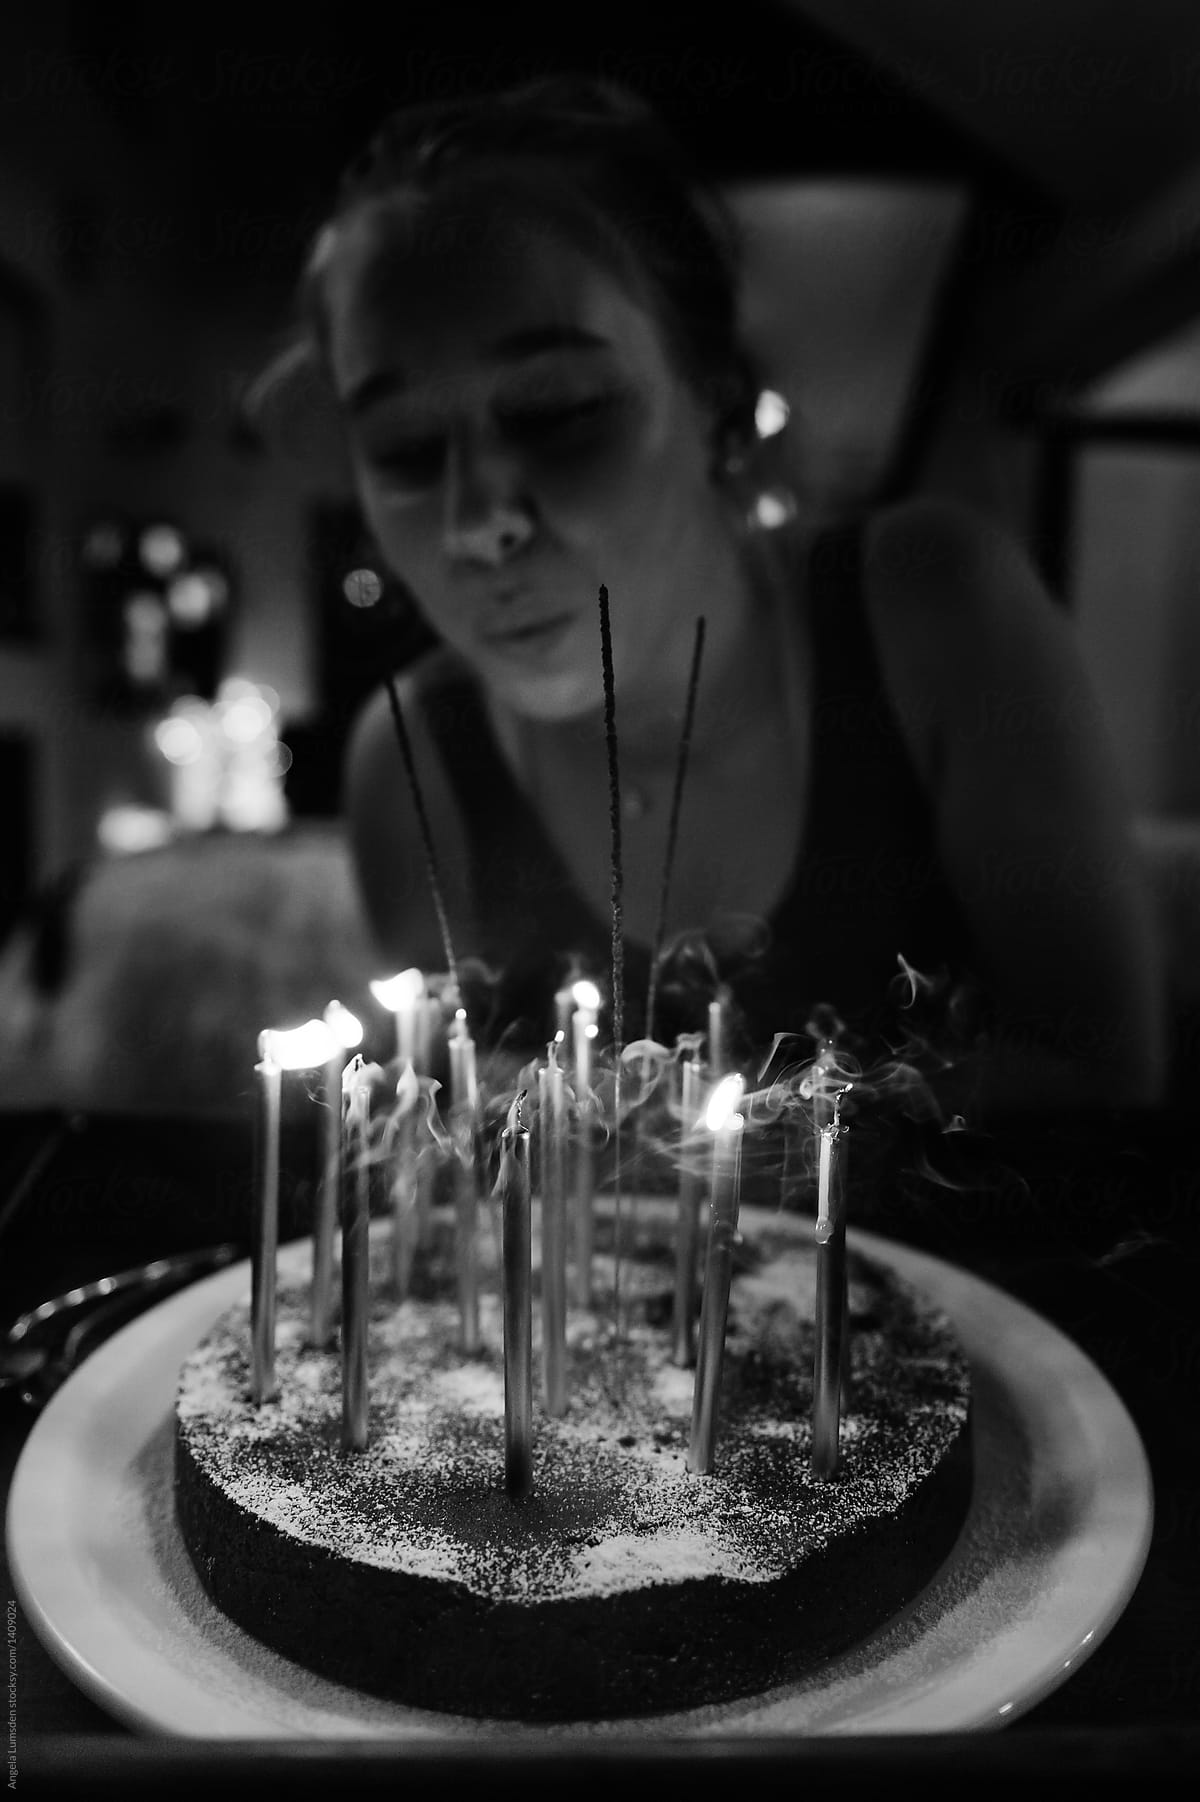 Teenage girl blowing out candles on a birthday cake